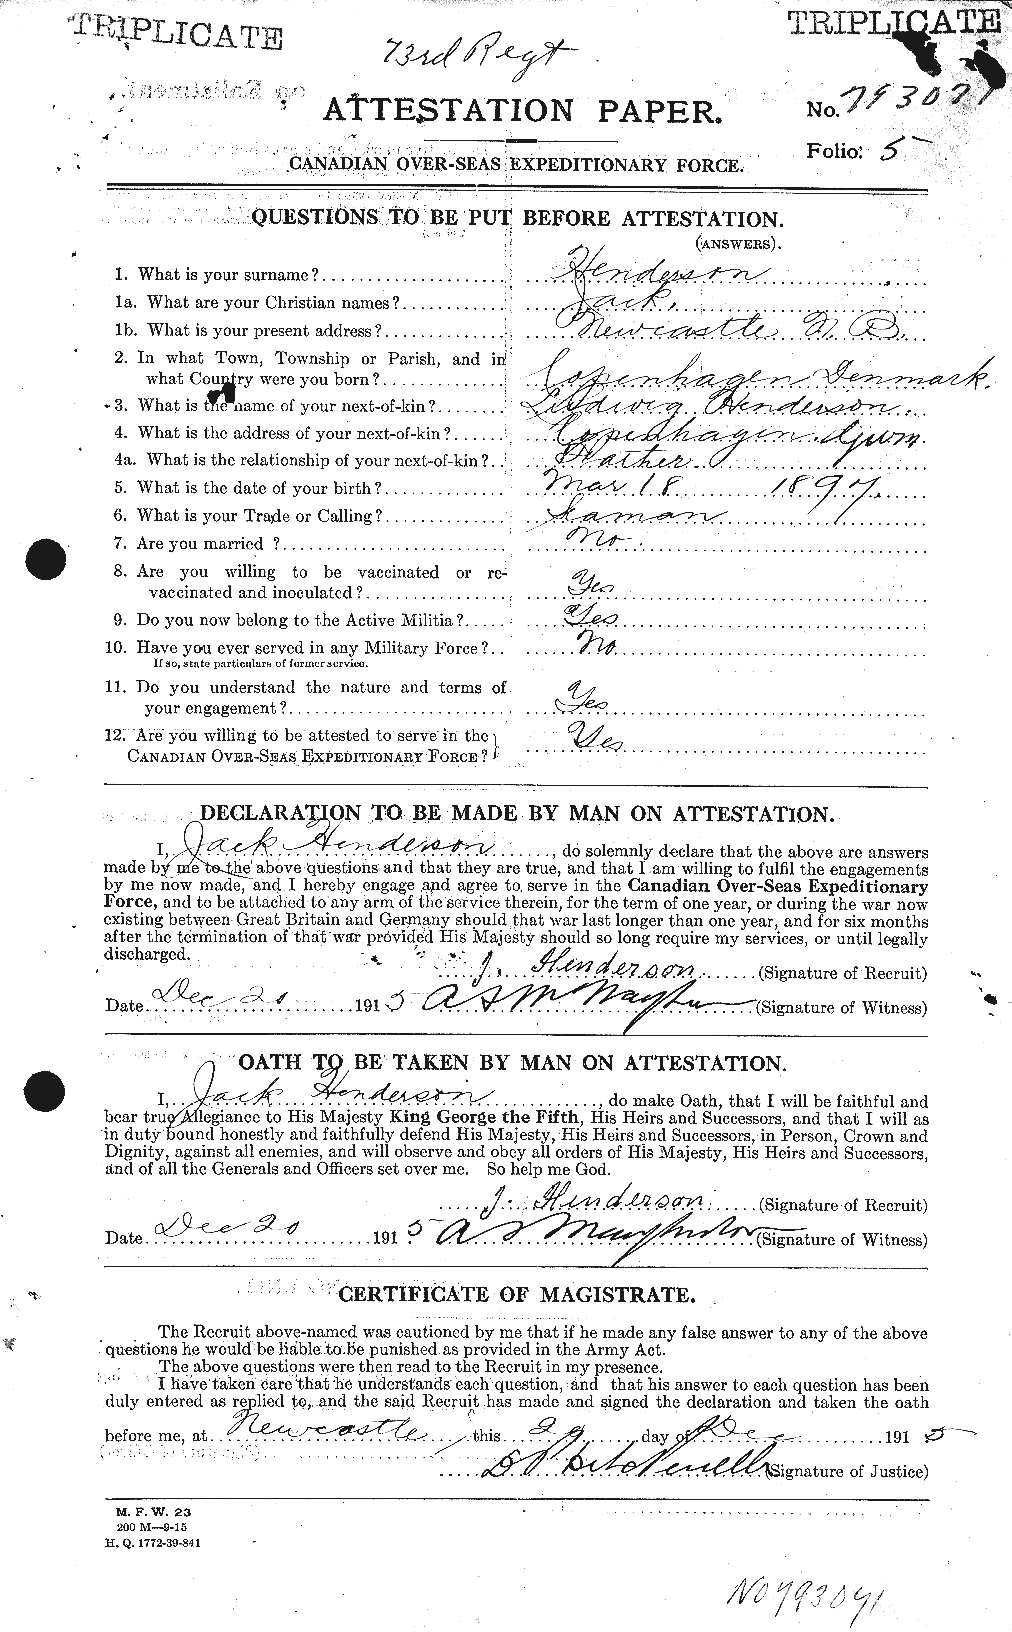 Personnel Records of the First World War - CEF 390348a